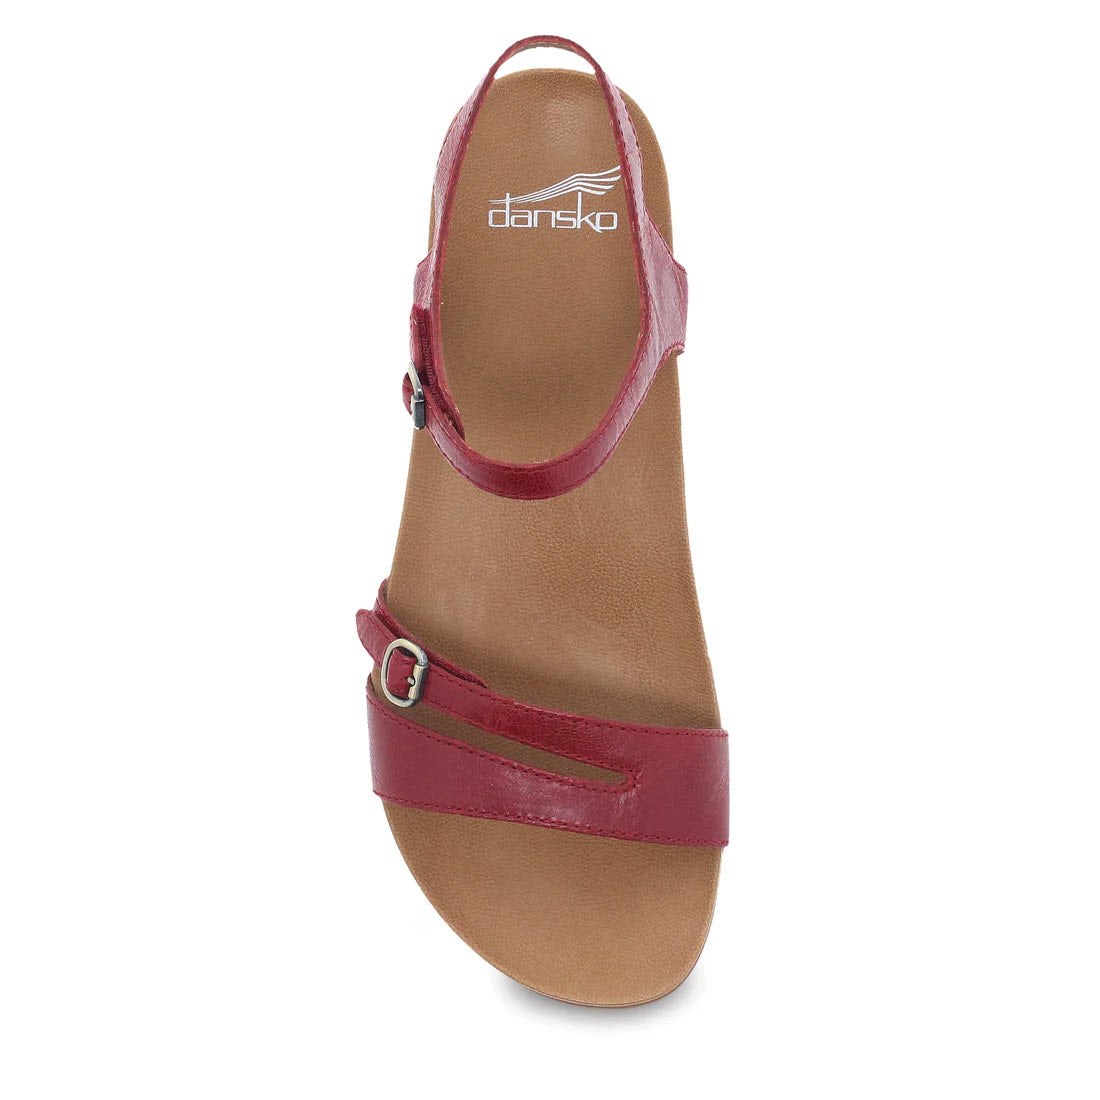 A red glazed leather Dansko Janelle sandal with an ankle strap and a brown insole, viewed from the side.